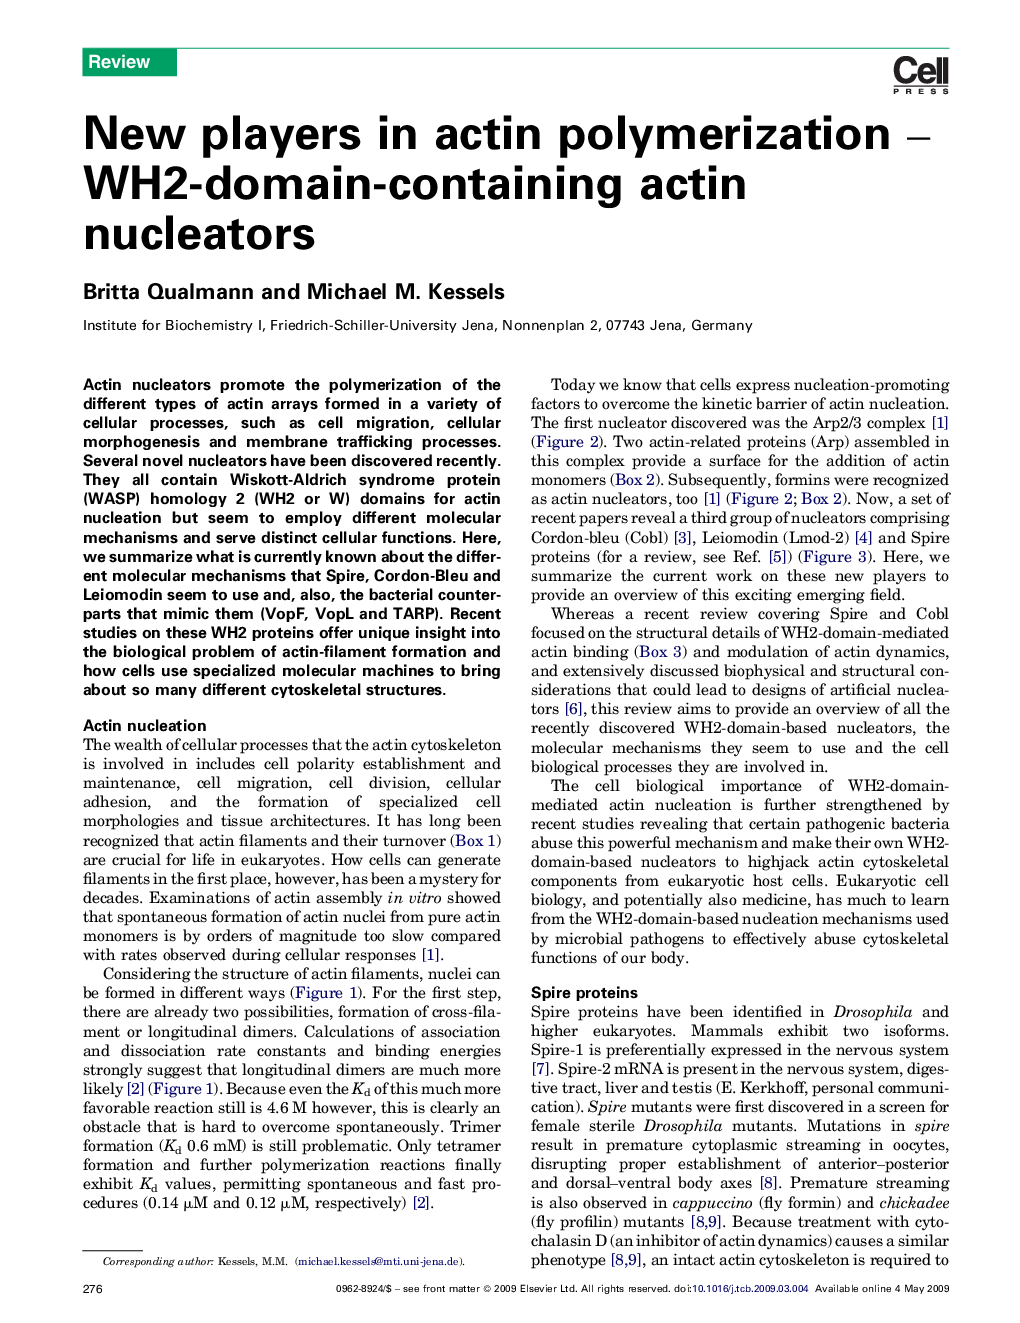 New players in actin polymerization – WH2-domain-containing actin nucleators